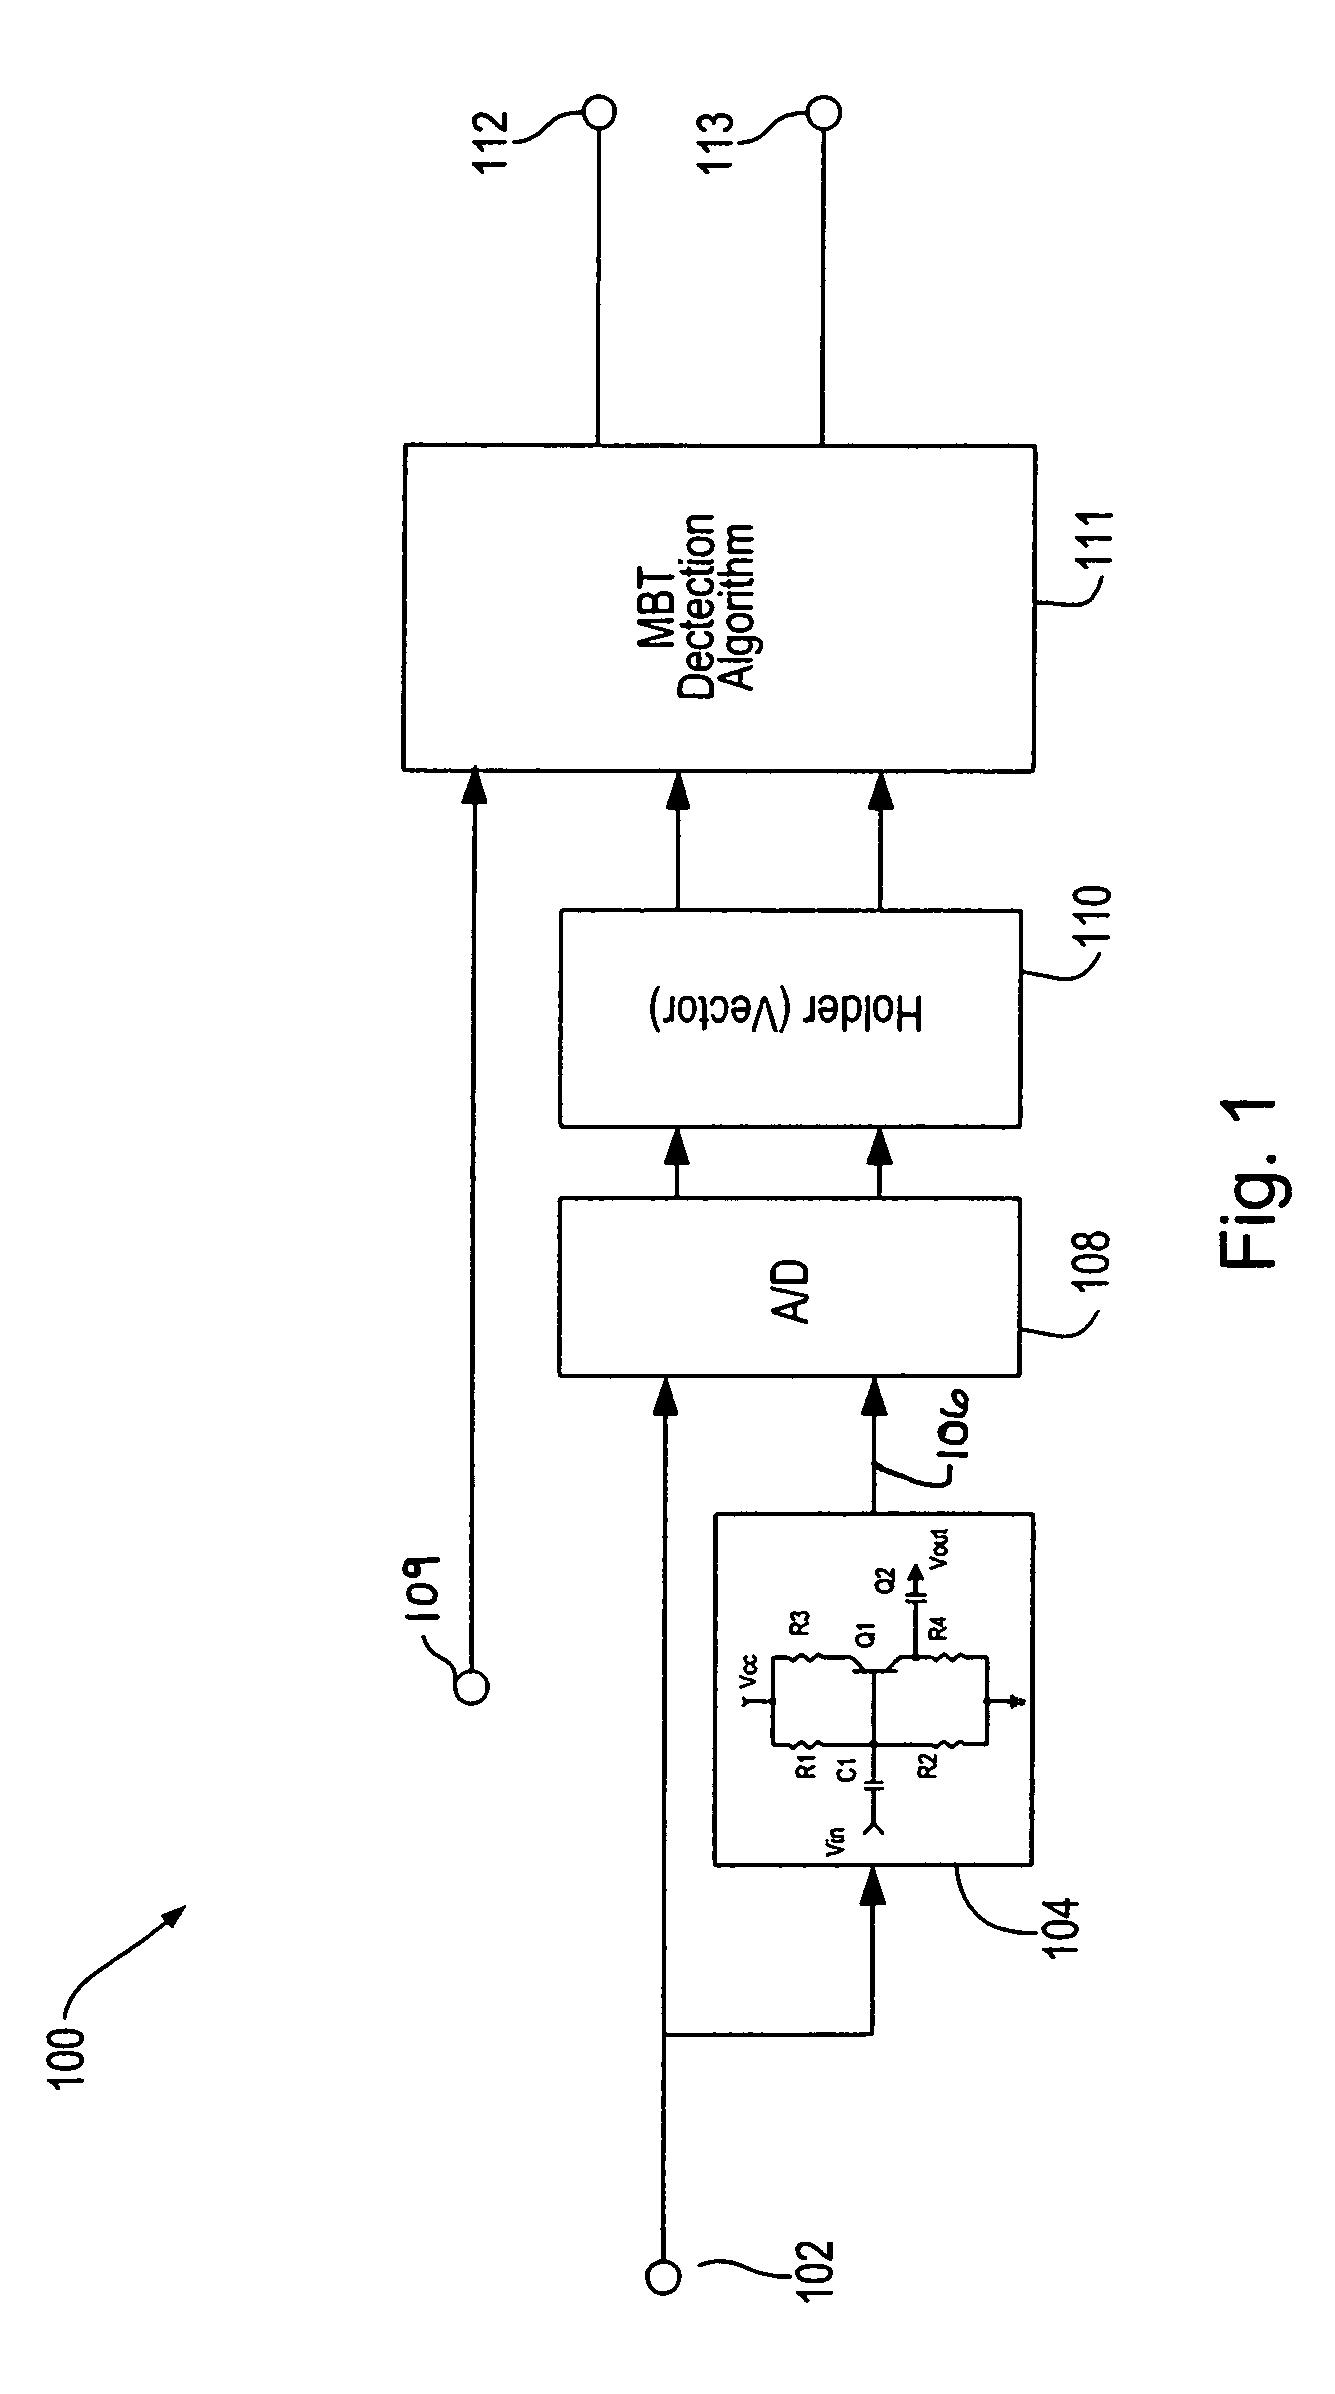 Method and system of estimating MBT timing using in-cylinder ionization signal